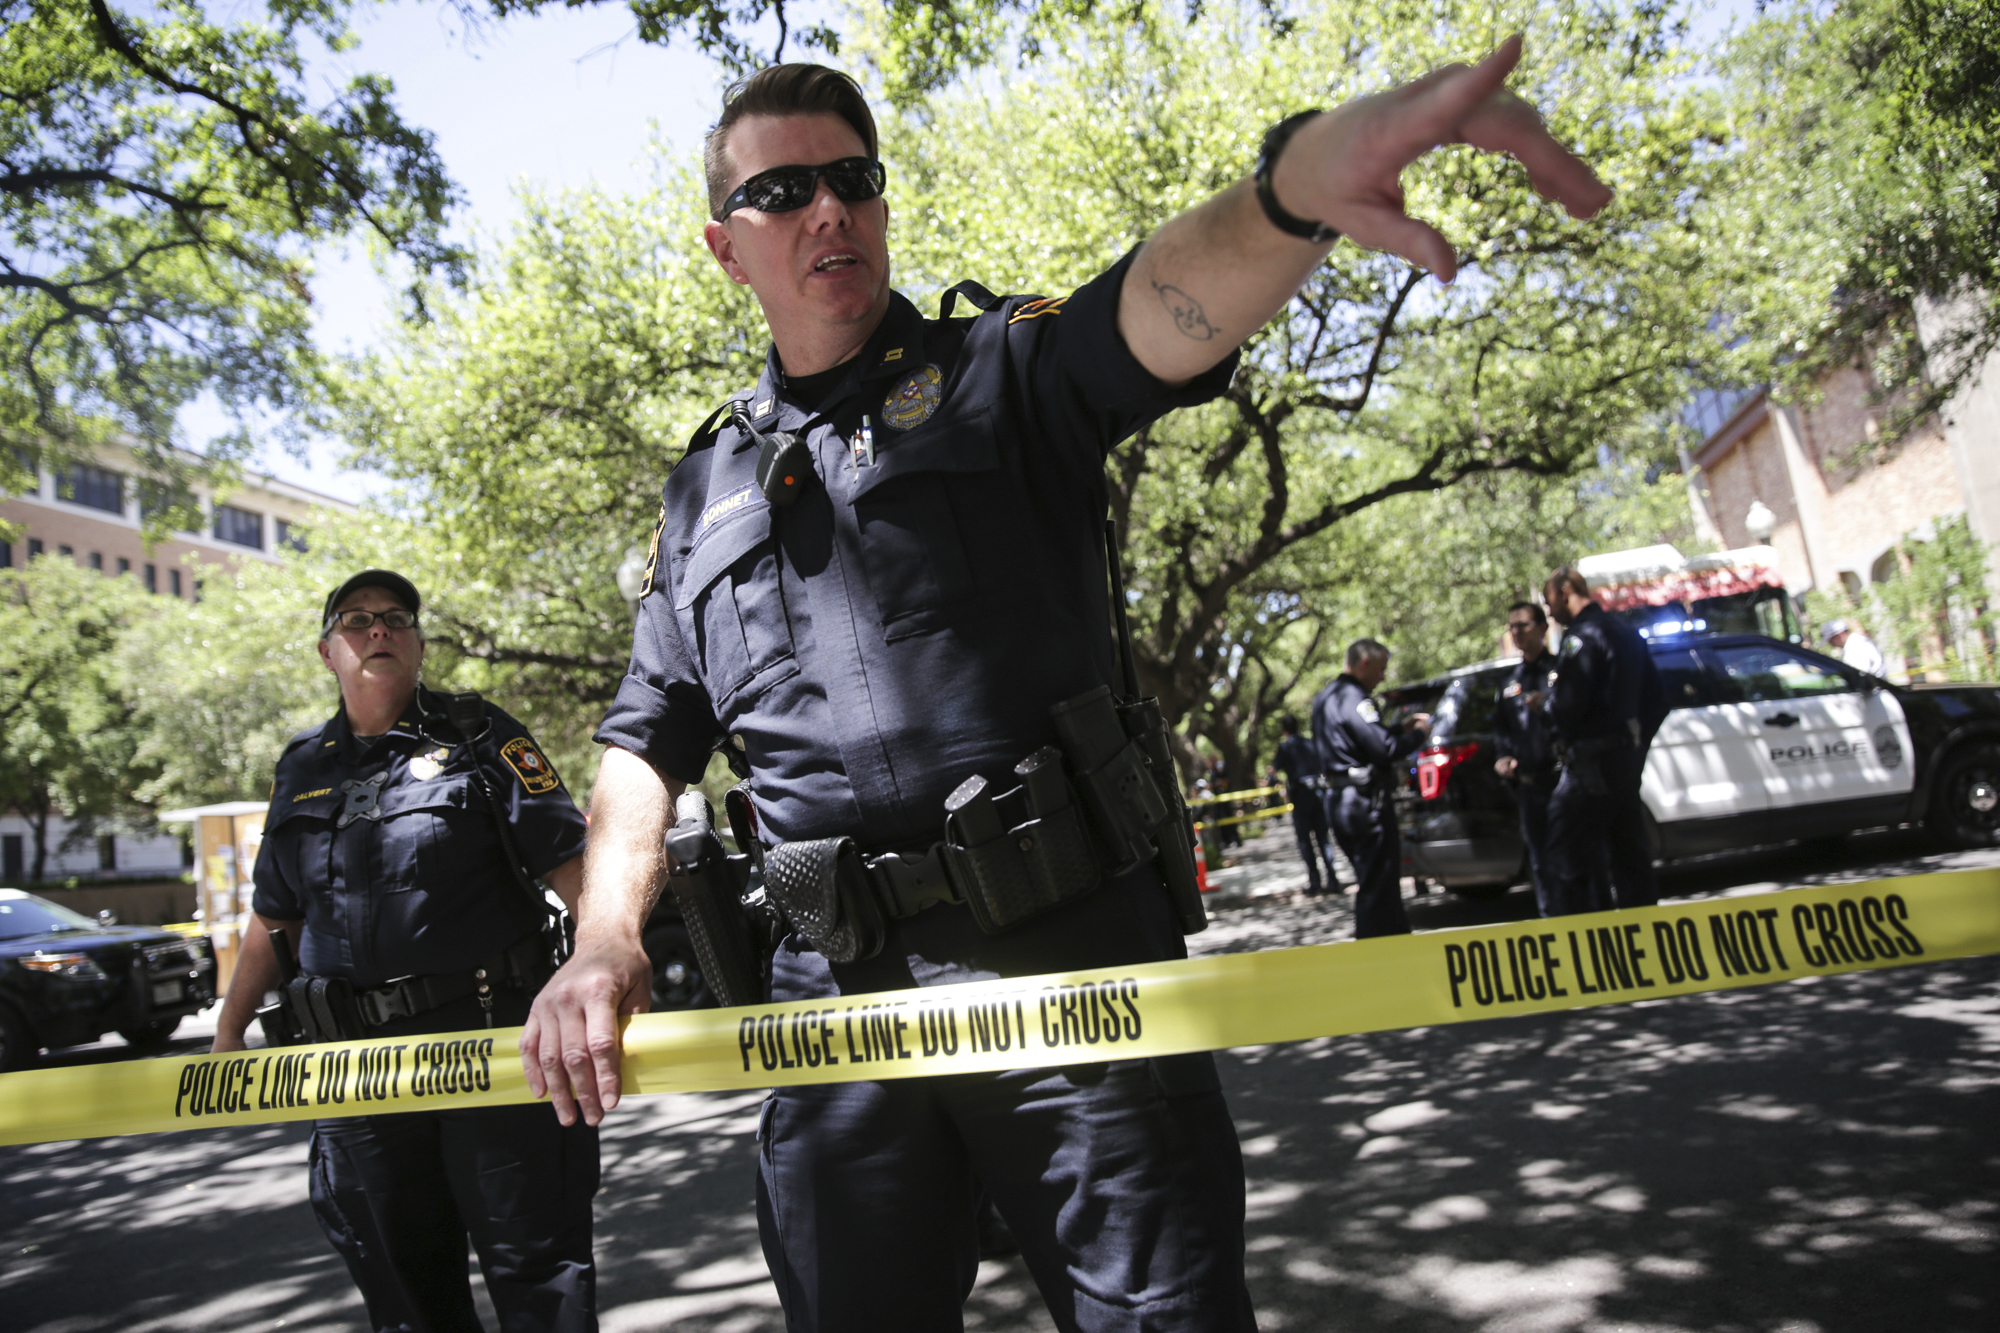 PHOTO: Law enforcement officers secure the scene after a fatal stabbing attack on the University of Texas campus Monday, May, 1, 2017.